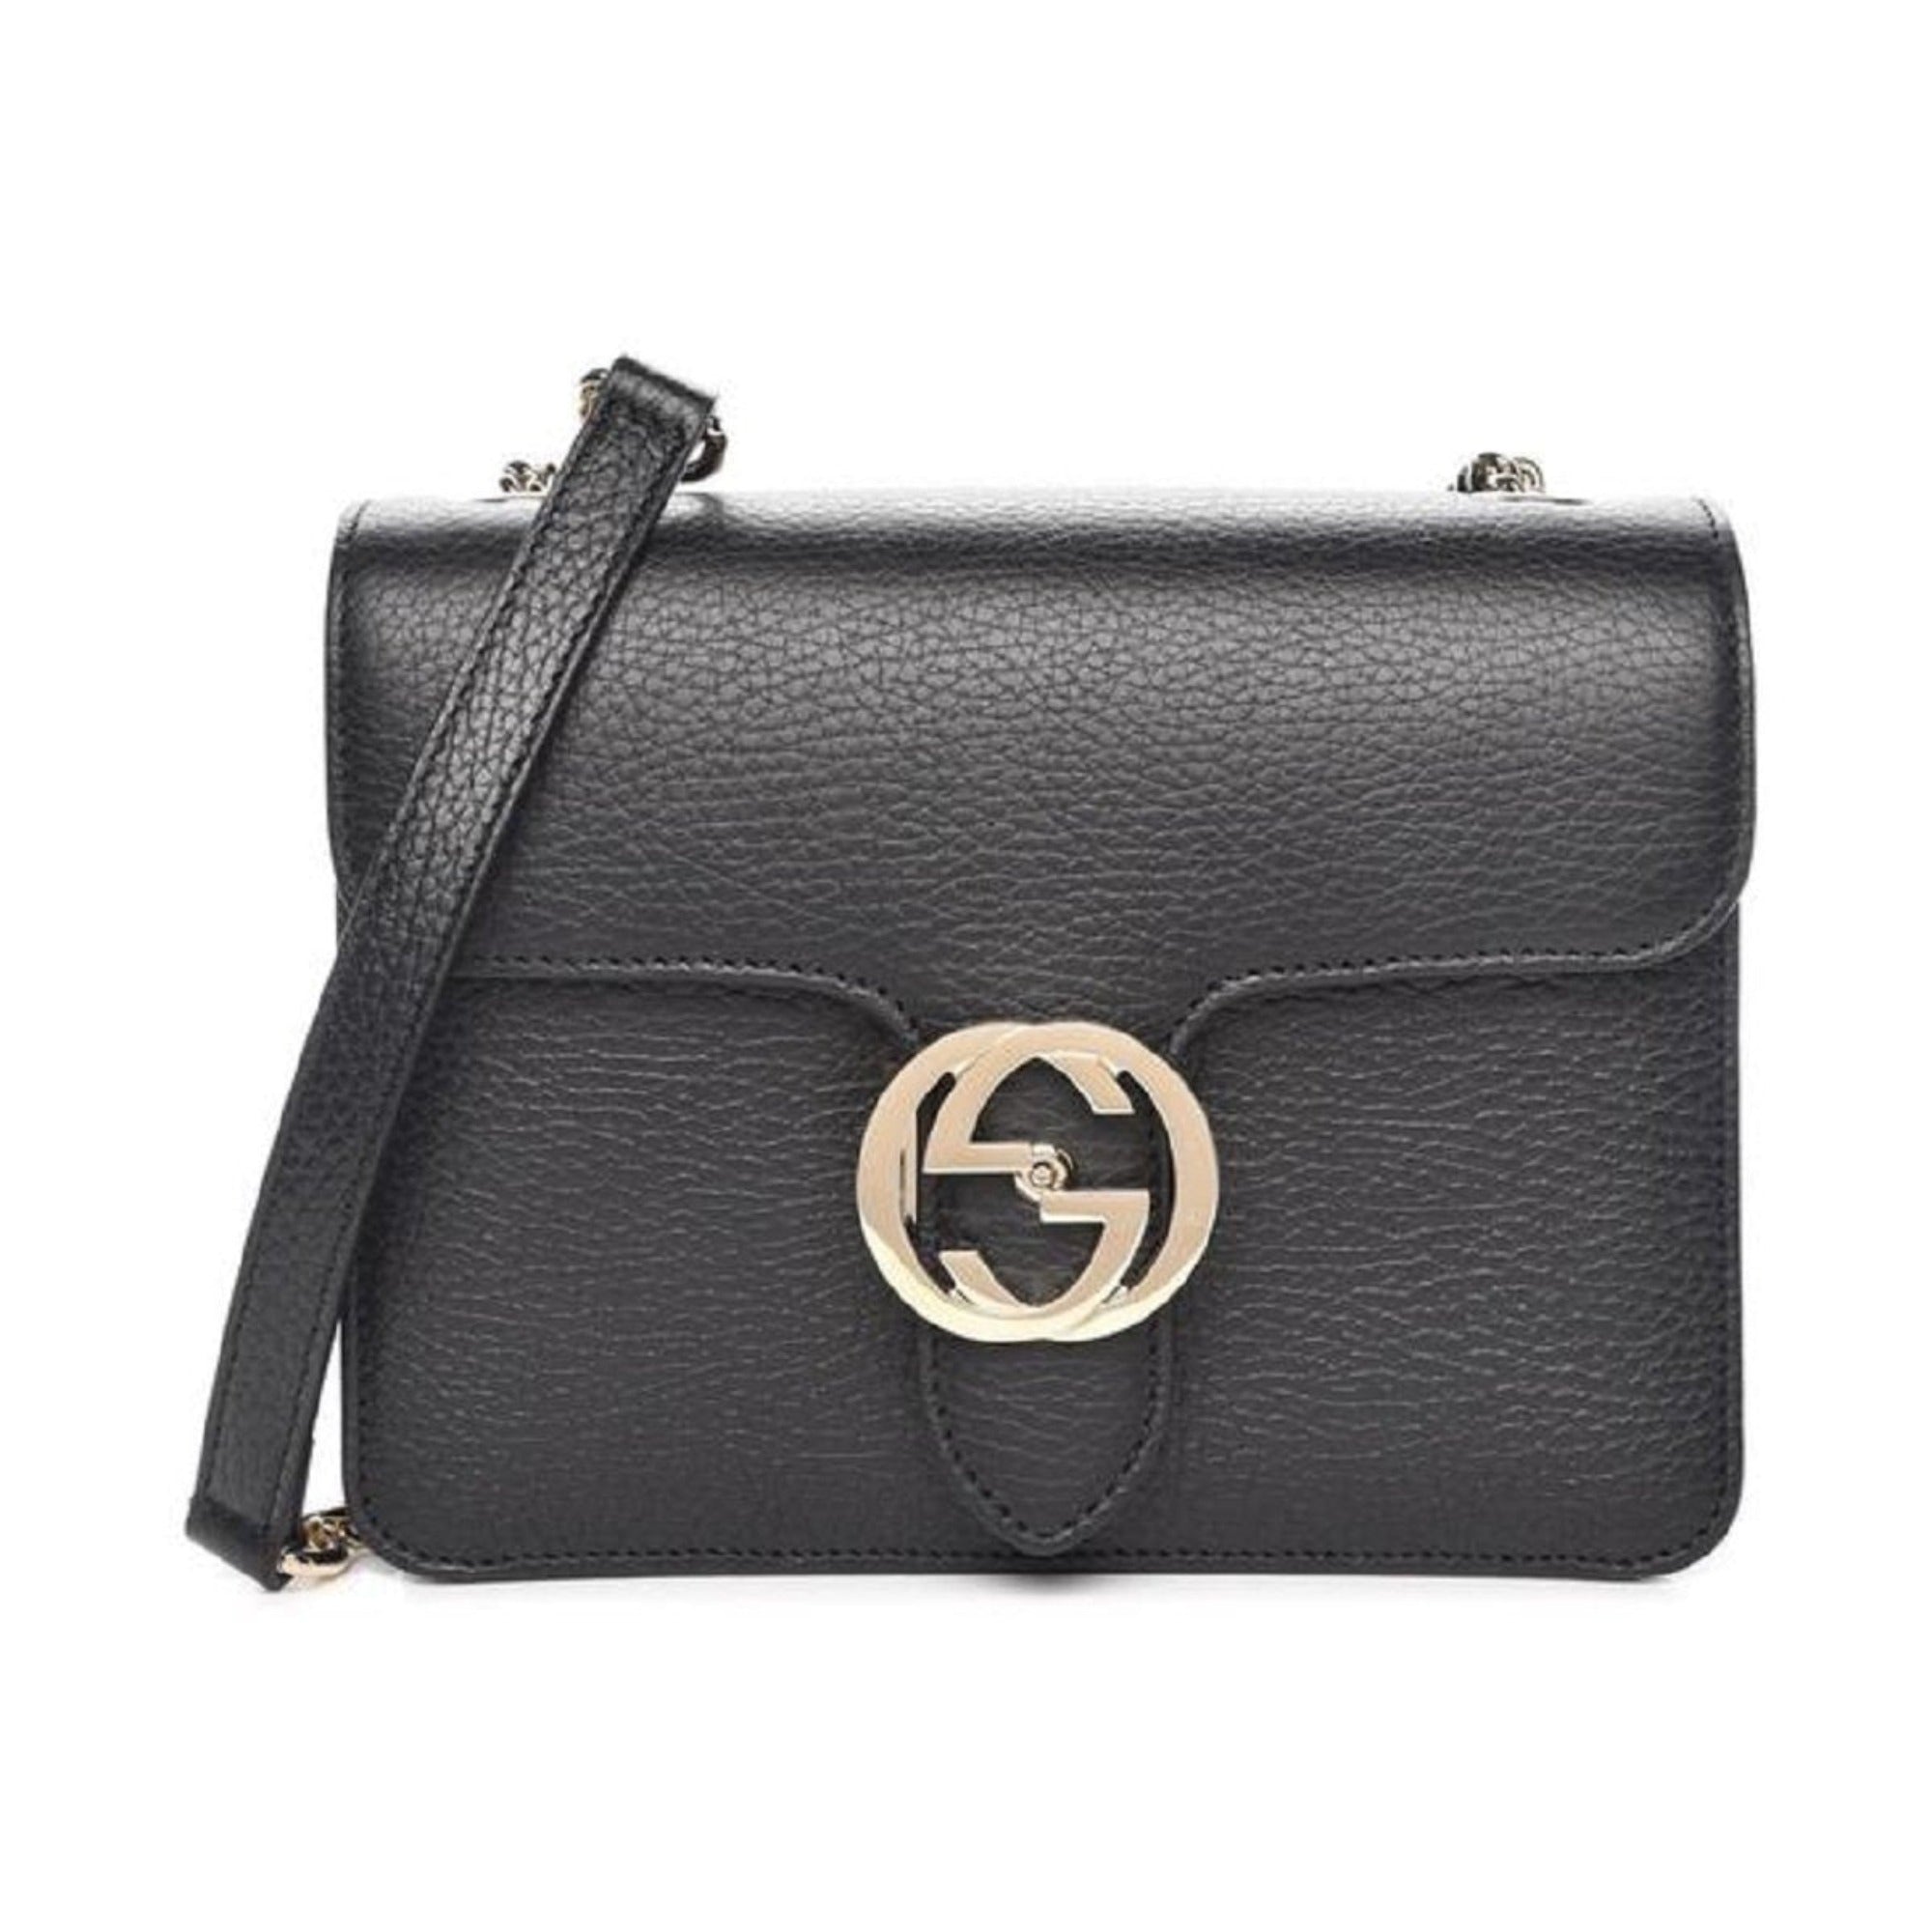 Gucci Marmont Black Icon GG Interlocking Small Cross Body Bag 510304 at_Queen_Bee_of_Beverly_Hills